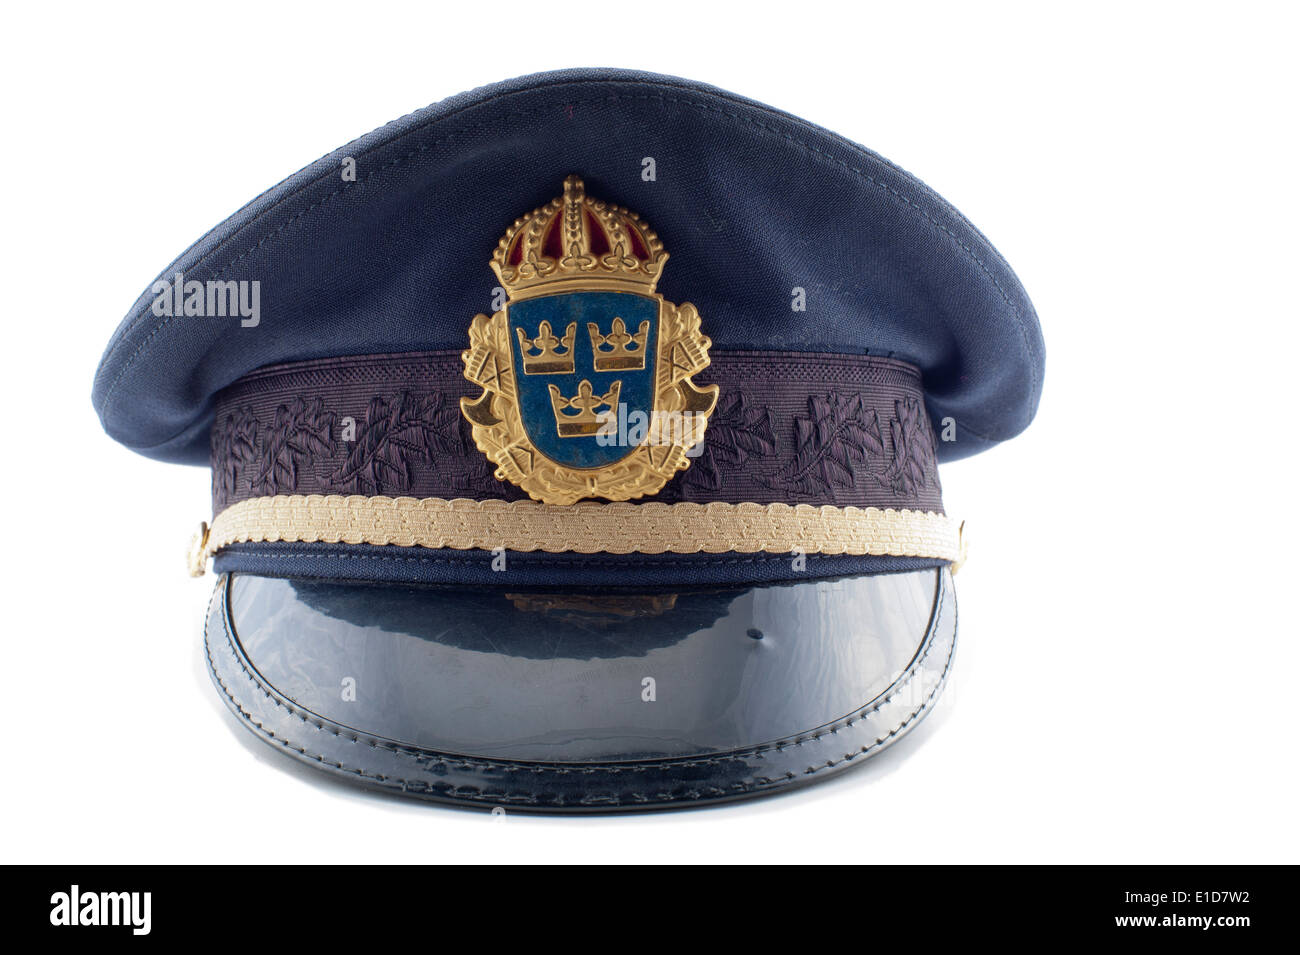 a police hat against white background Stock Photo